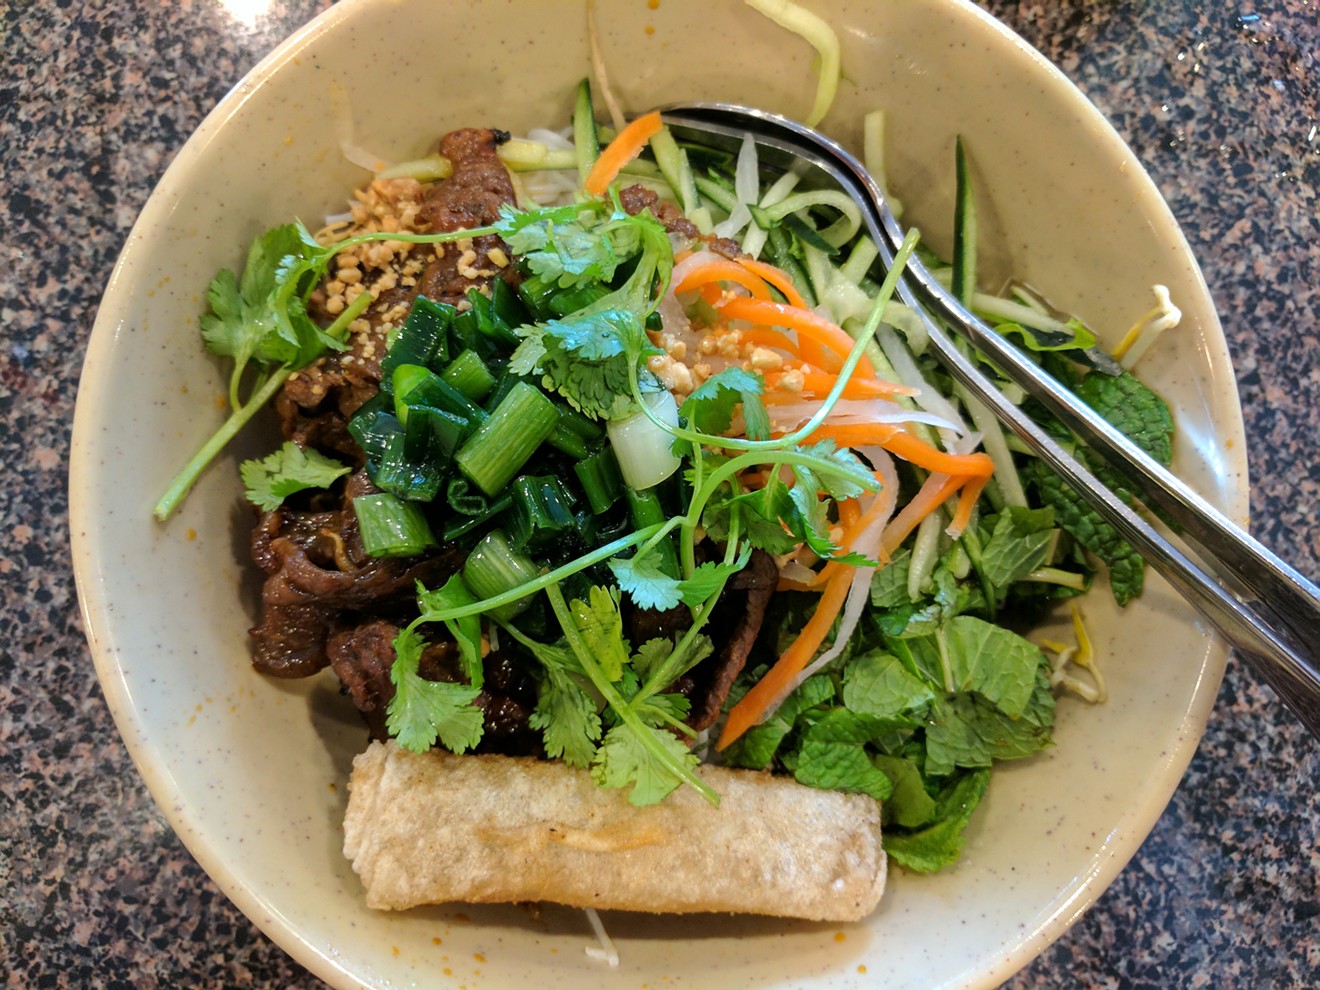 A vermicelli bowl at Dong Que, under a shower of herbs and a crisply fried spring roll, makes a satisfying one-bowl meal.